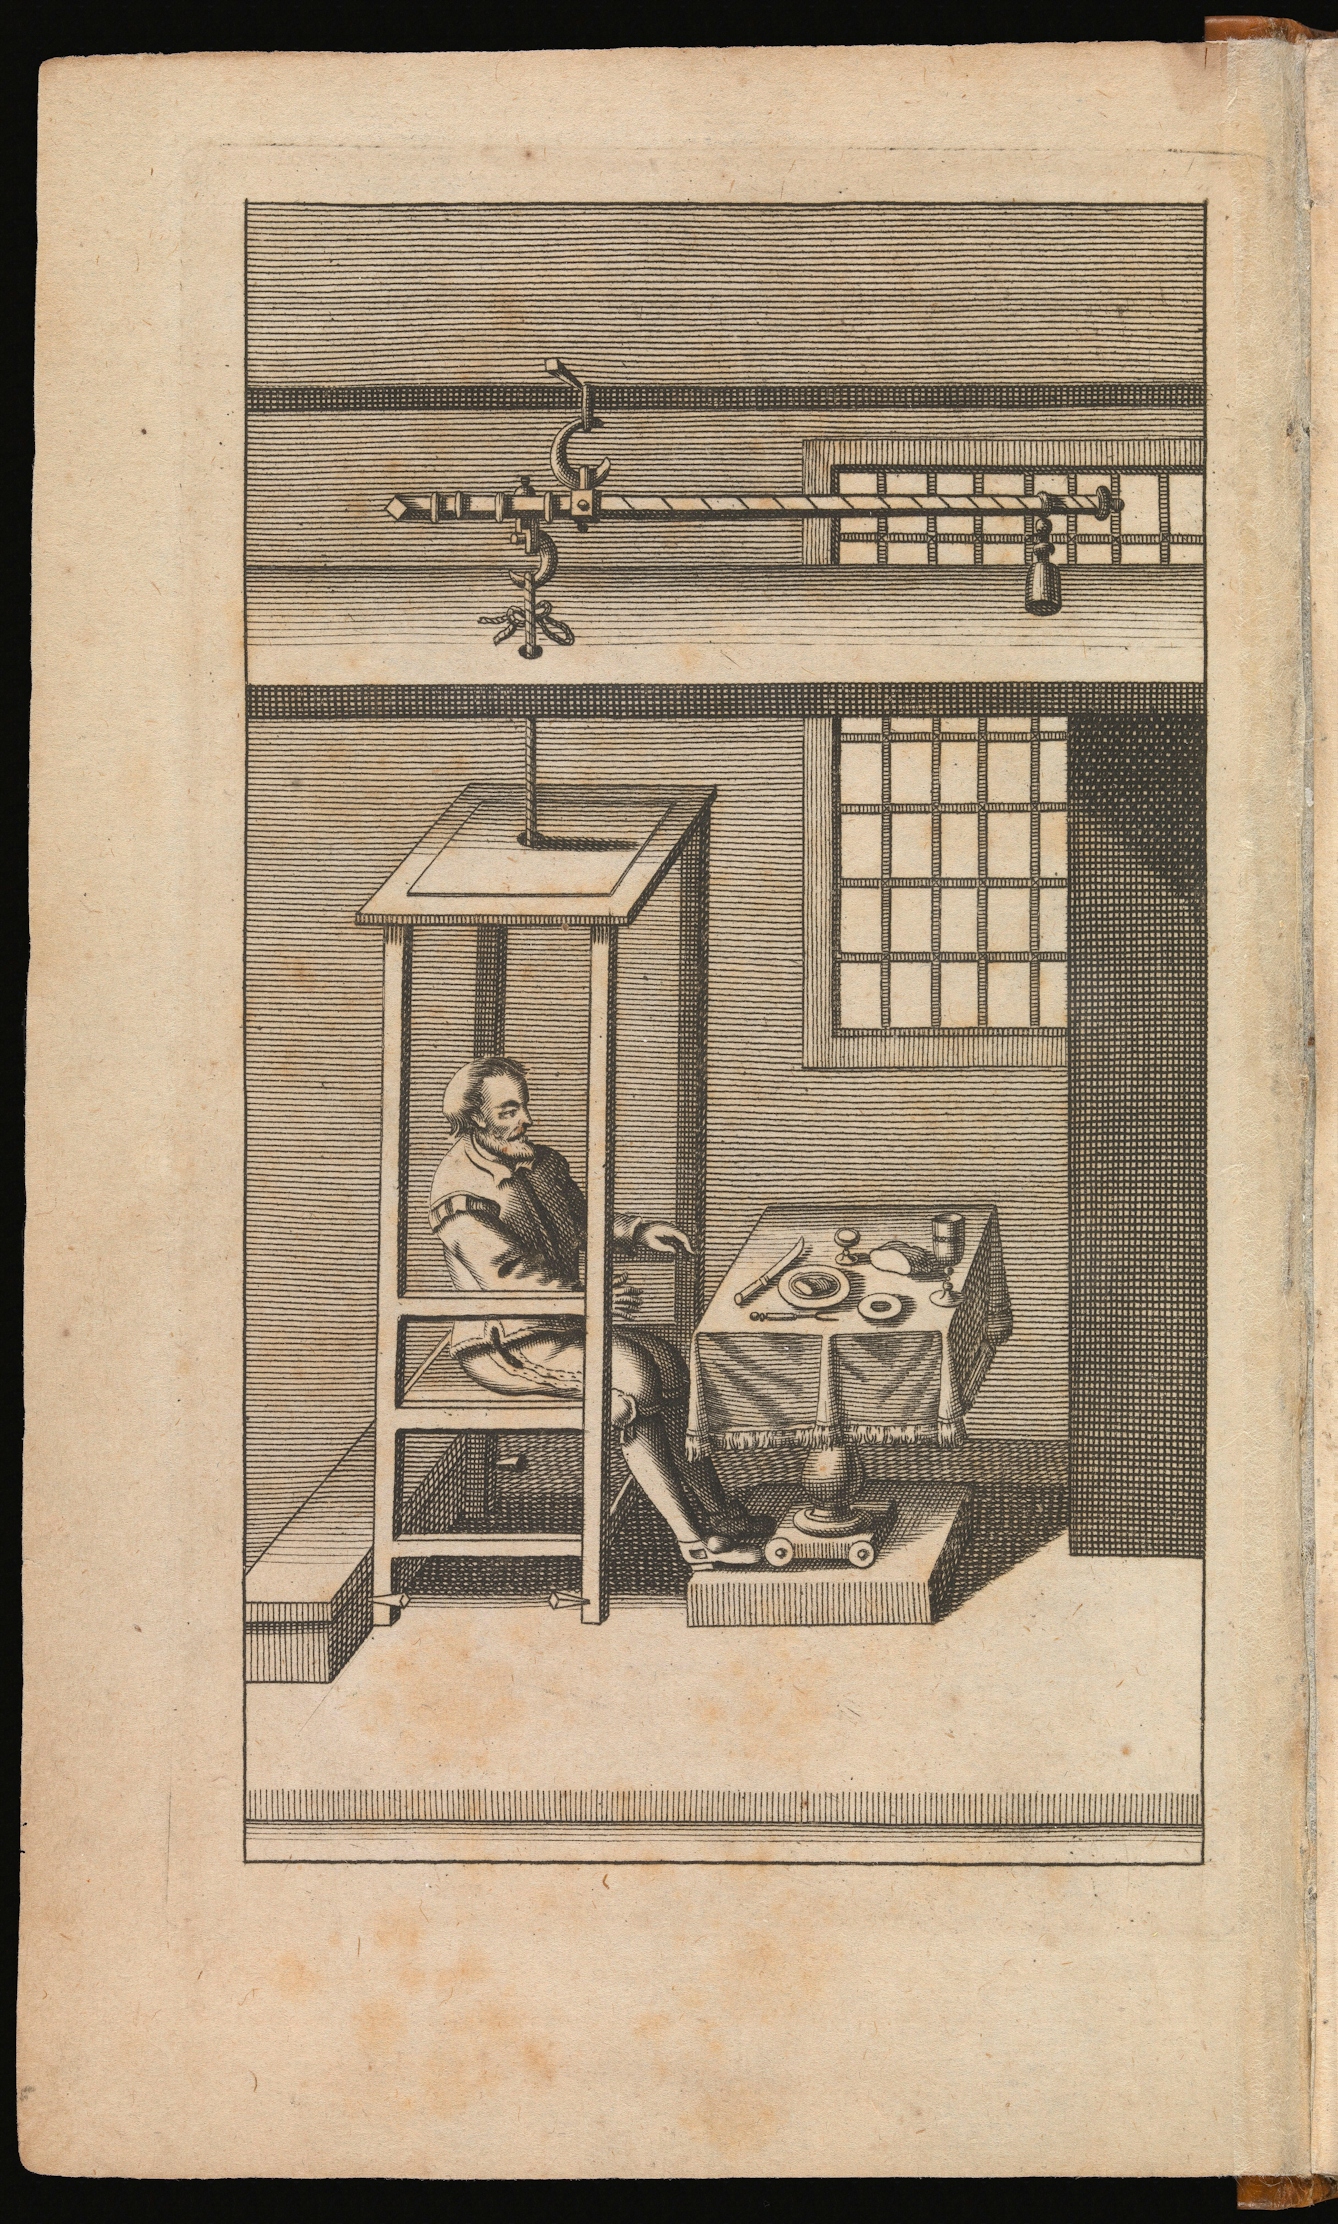 Engraving showing Sanctorio sitting in a lift-like frame with a seat, in front of a table set with food, to show how he measured everything he consumed and excreted. 